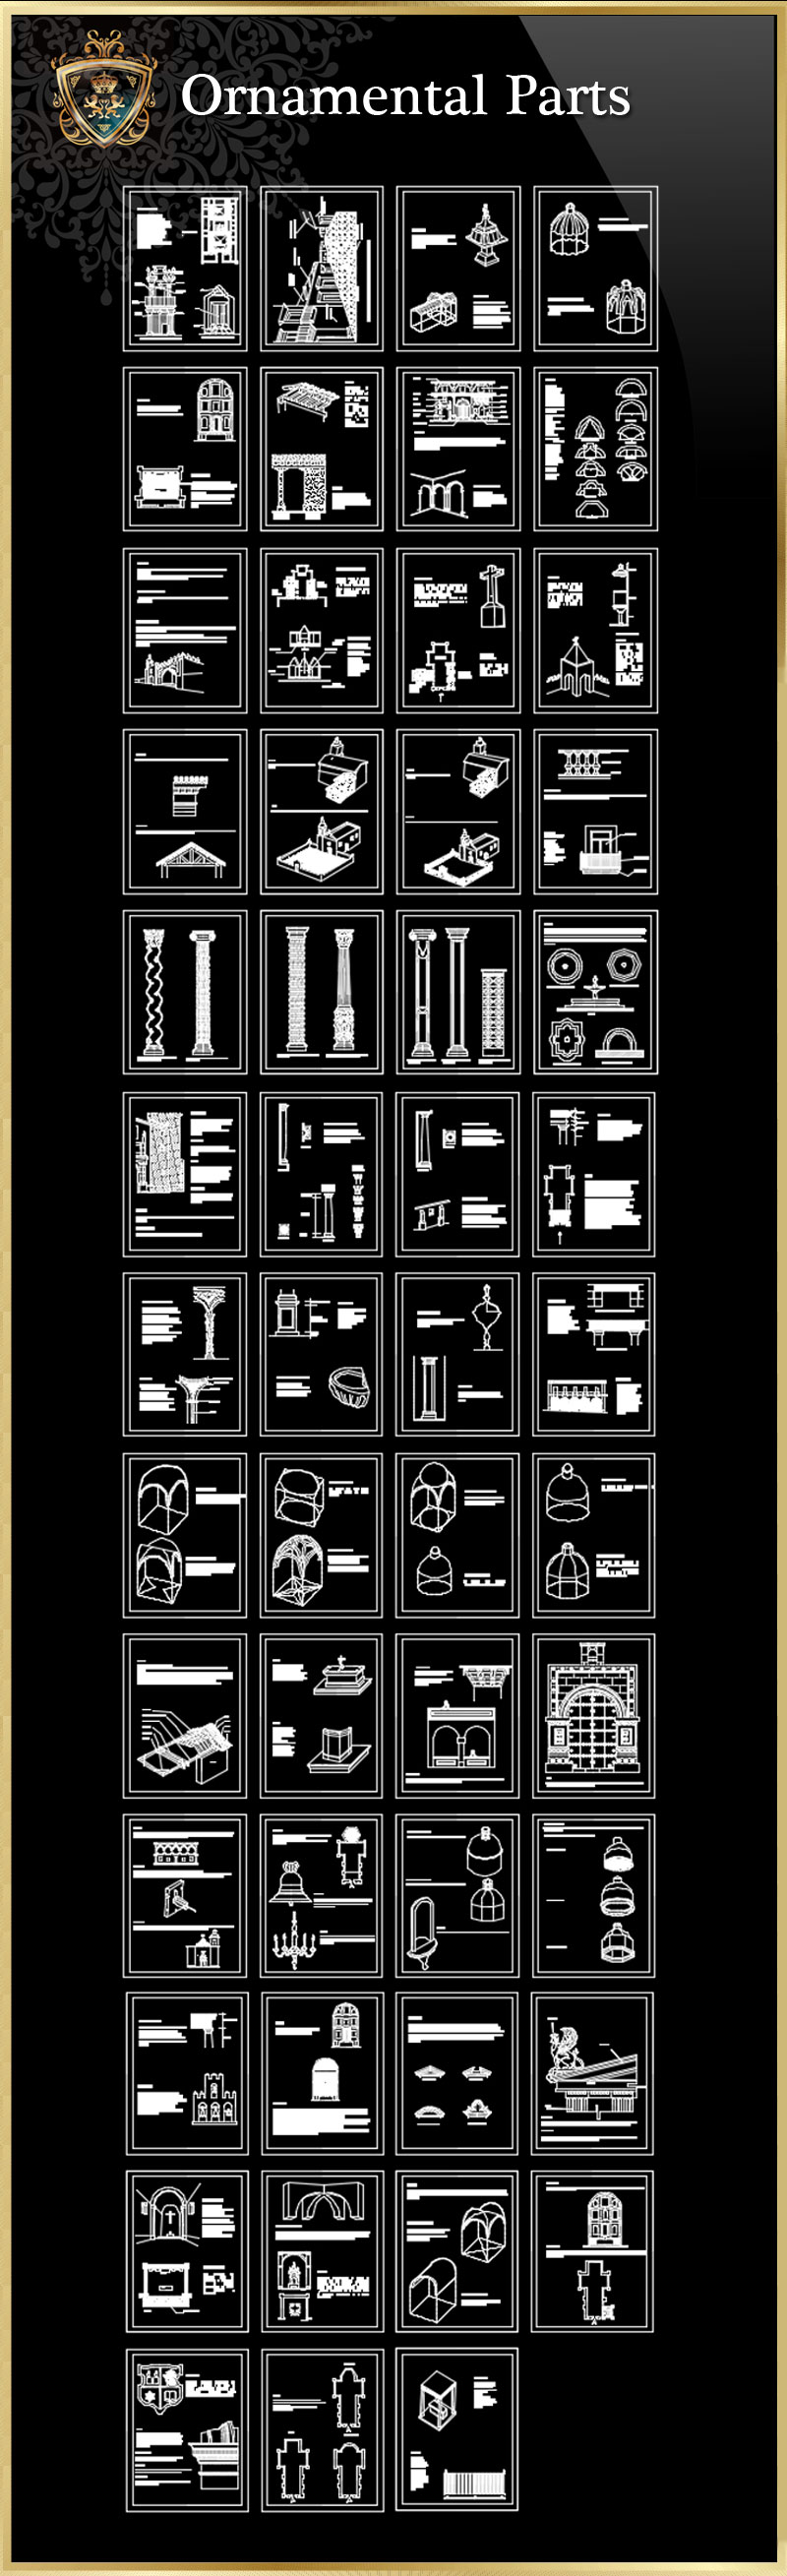 ★【Ornamental Parts of Buildings 1】Download Luxury Architectural Design CAD Drawings--Over 20000+ High quality CAD Blocks and Drawings Download!